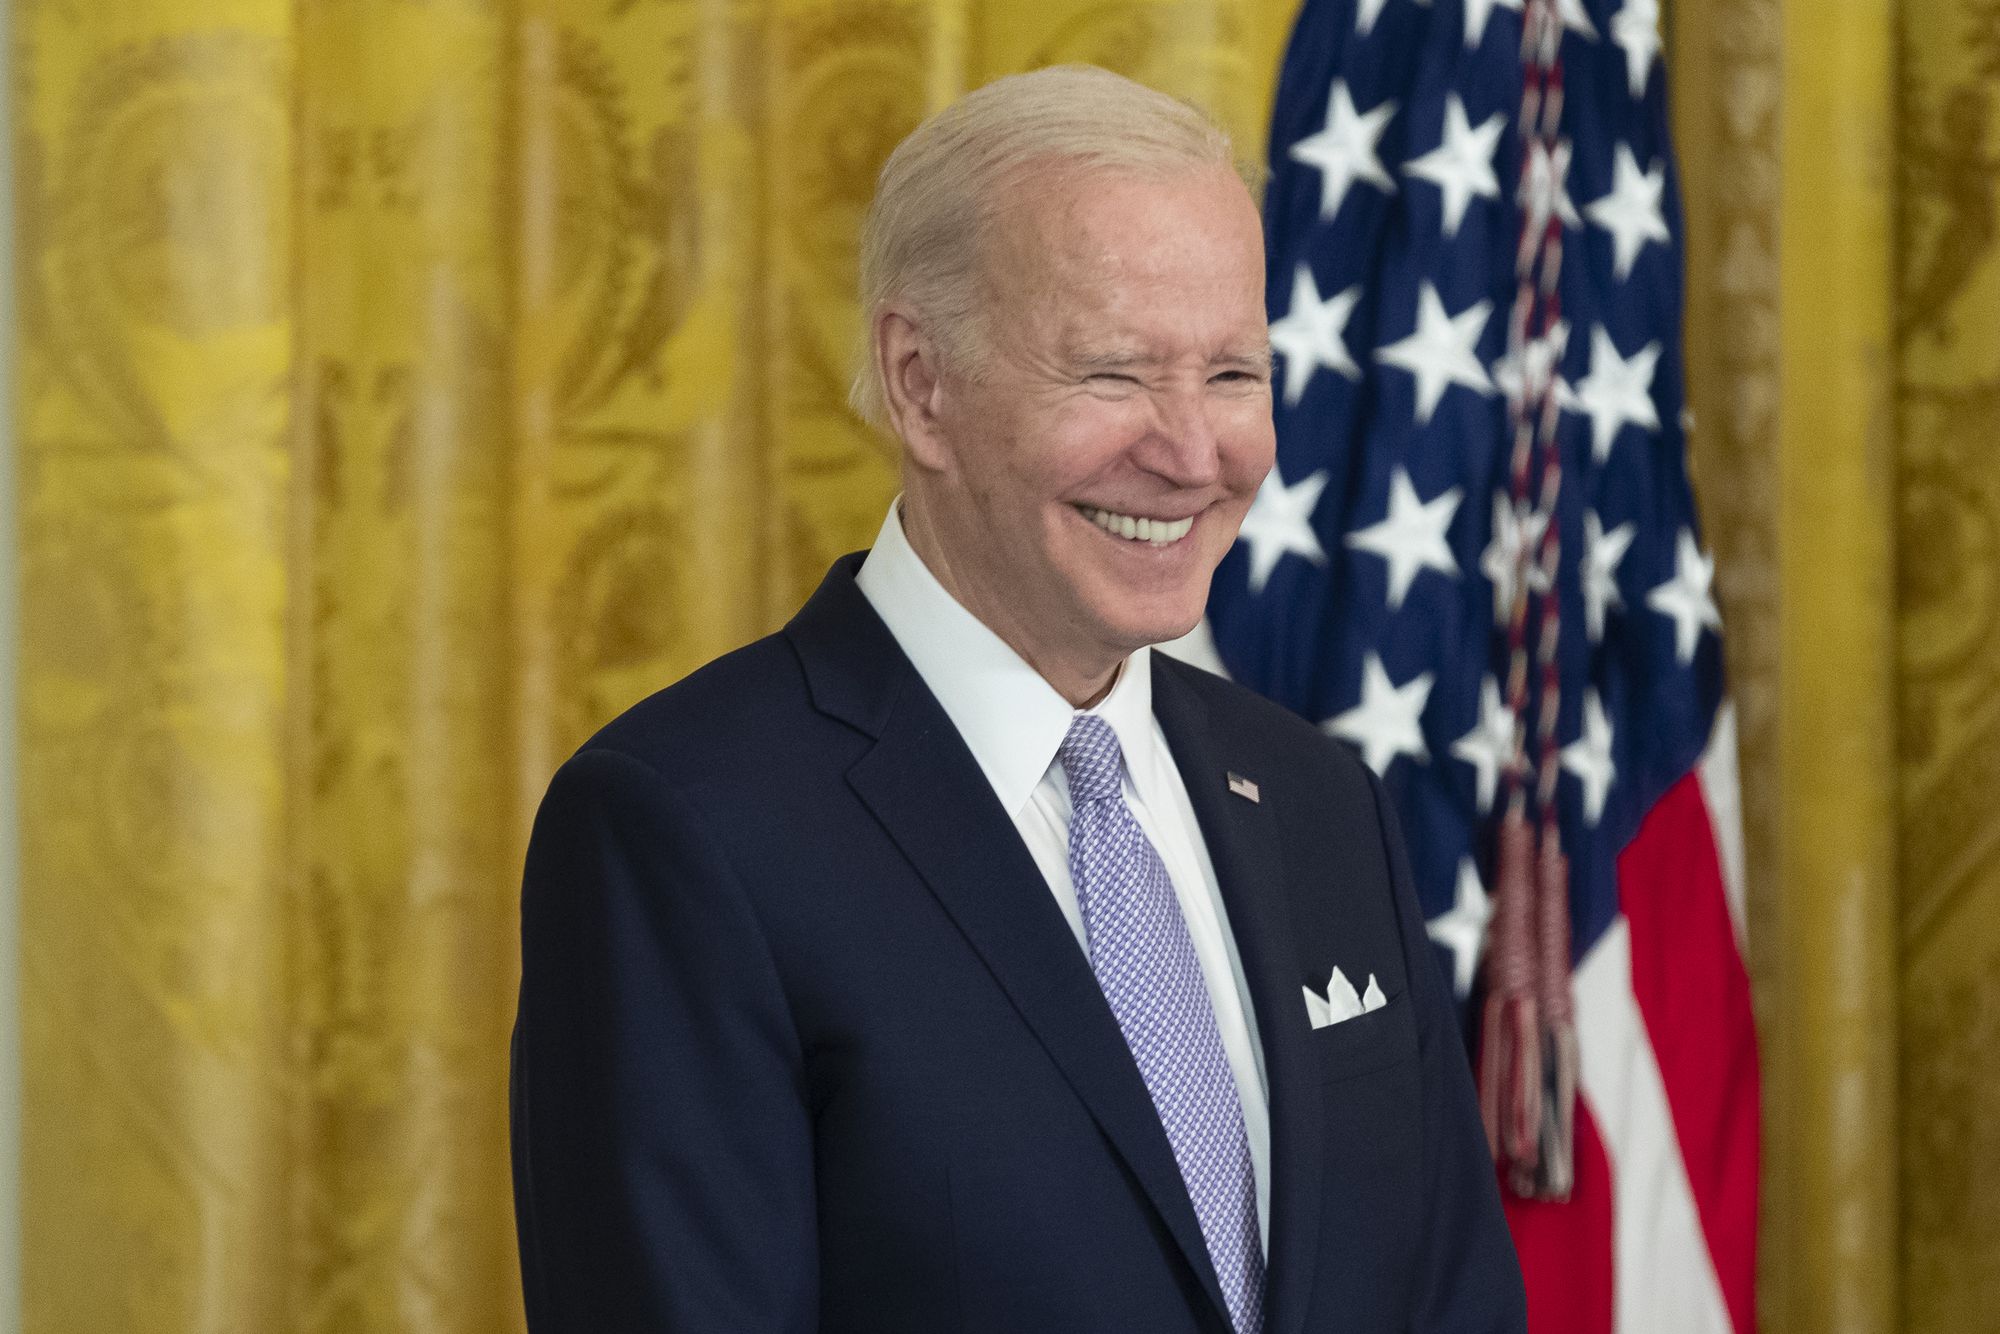 At 80 years old, President Joe Biden's age has been a target of criticism from opponents. File Photo by Michael Reynolds/UPI